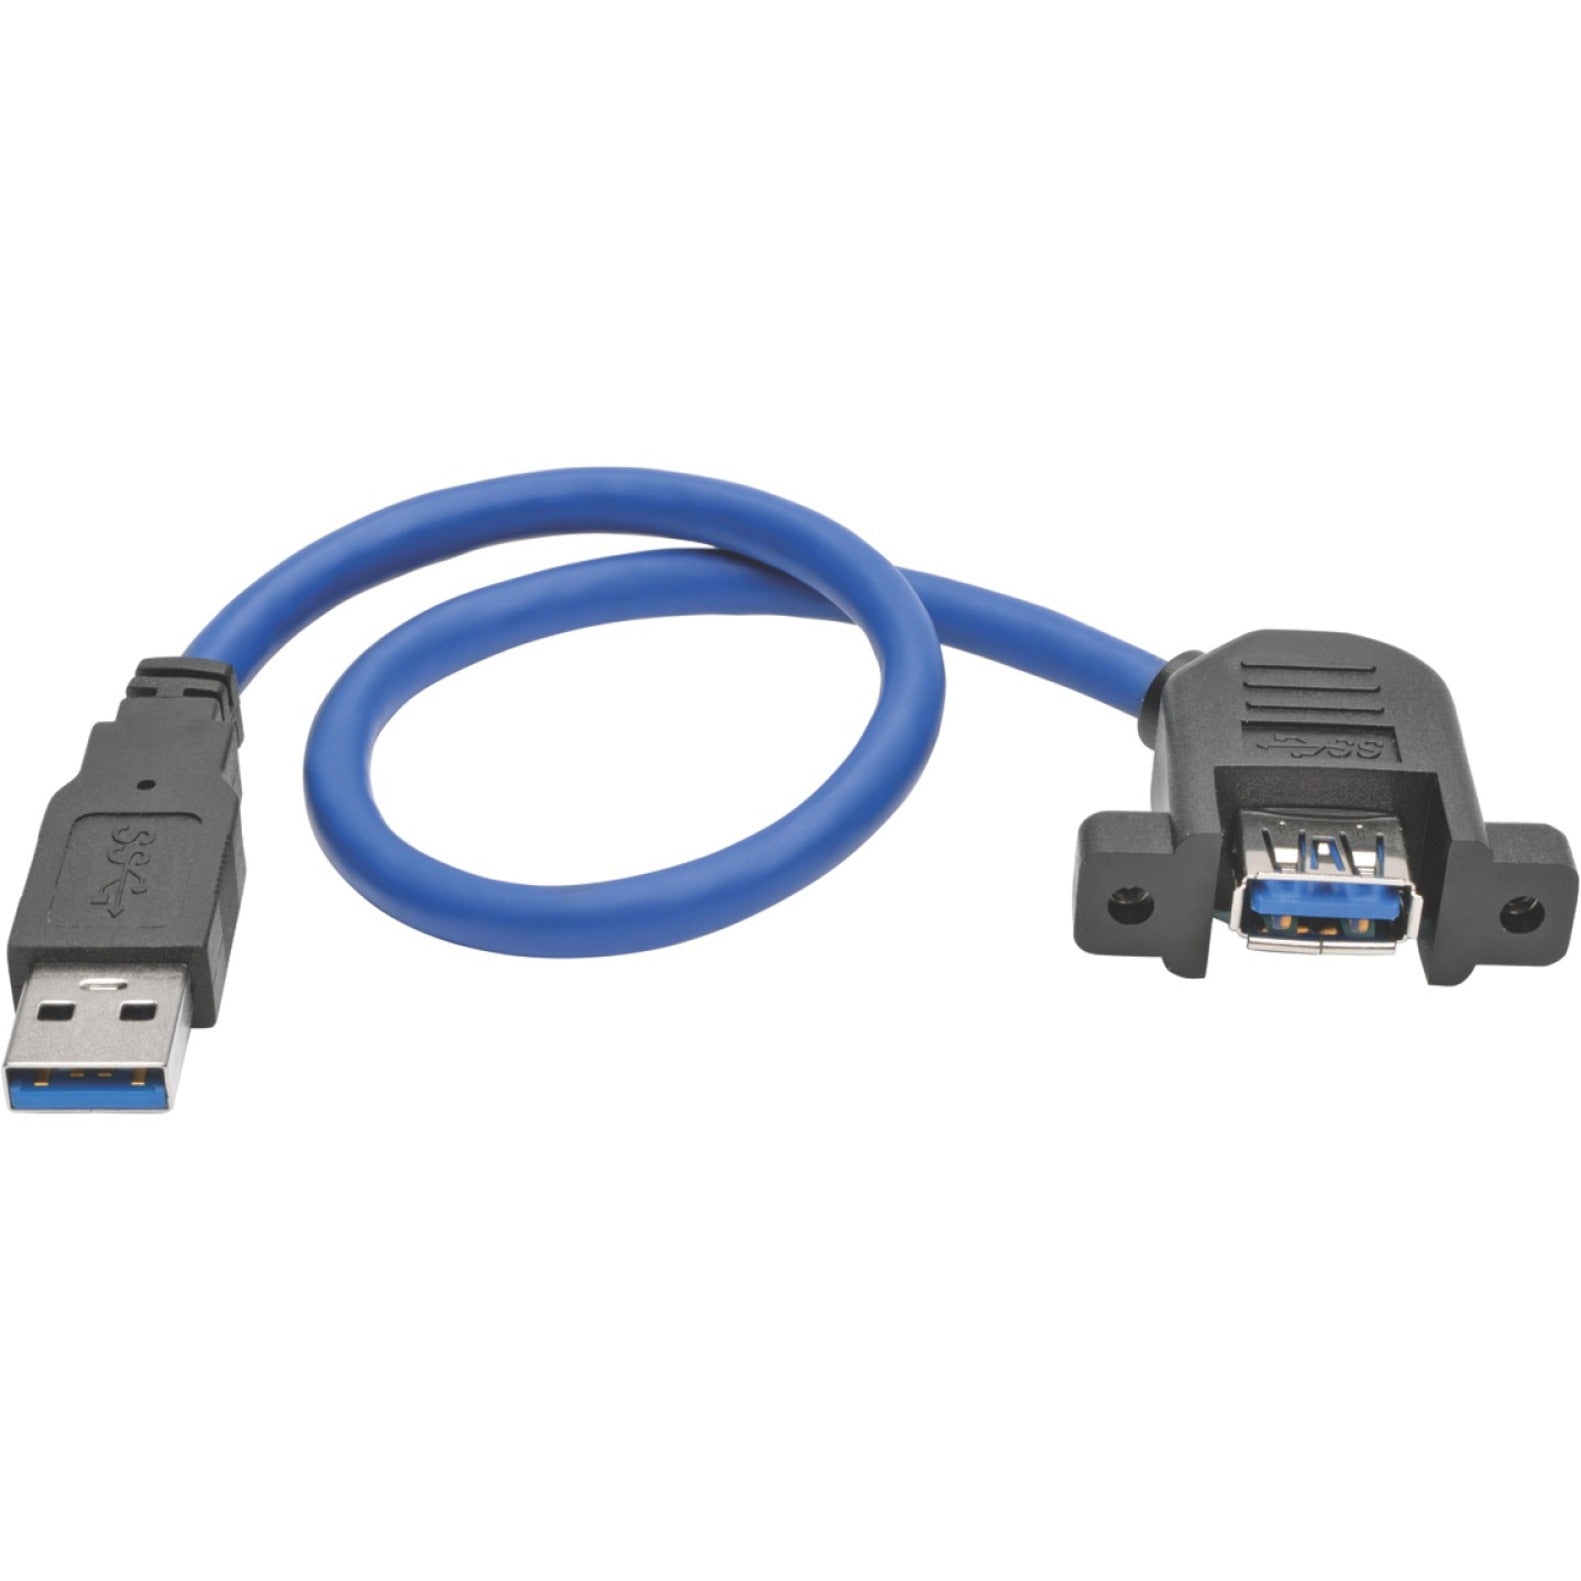 Tripp Lite U324-001-APM USB 3.0 SuperSpeed Panel-Mount Type-A Extension Cable (M/F), 1 ft, Gold-Plated Connectors, Rugged and Reliable